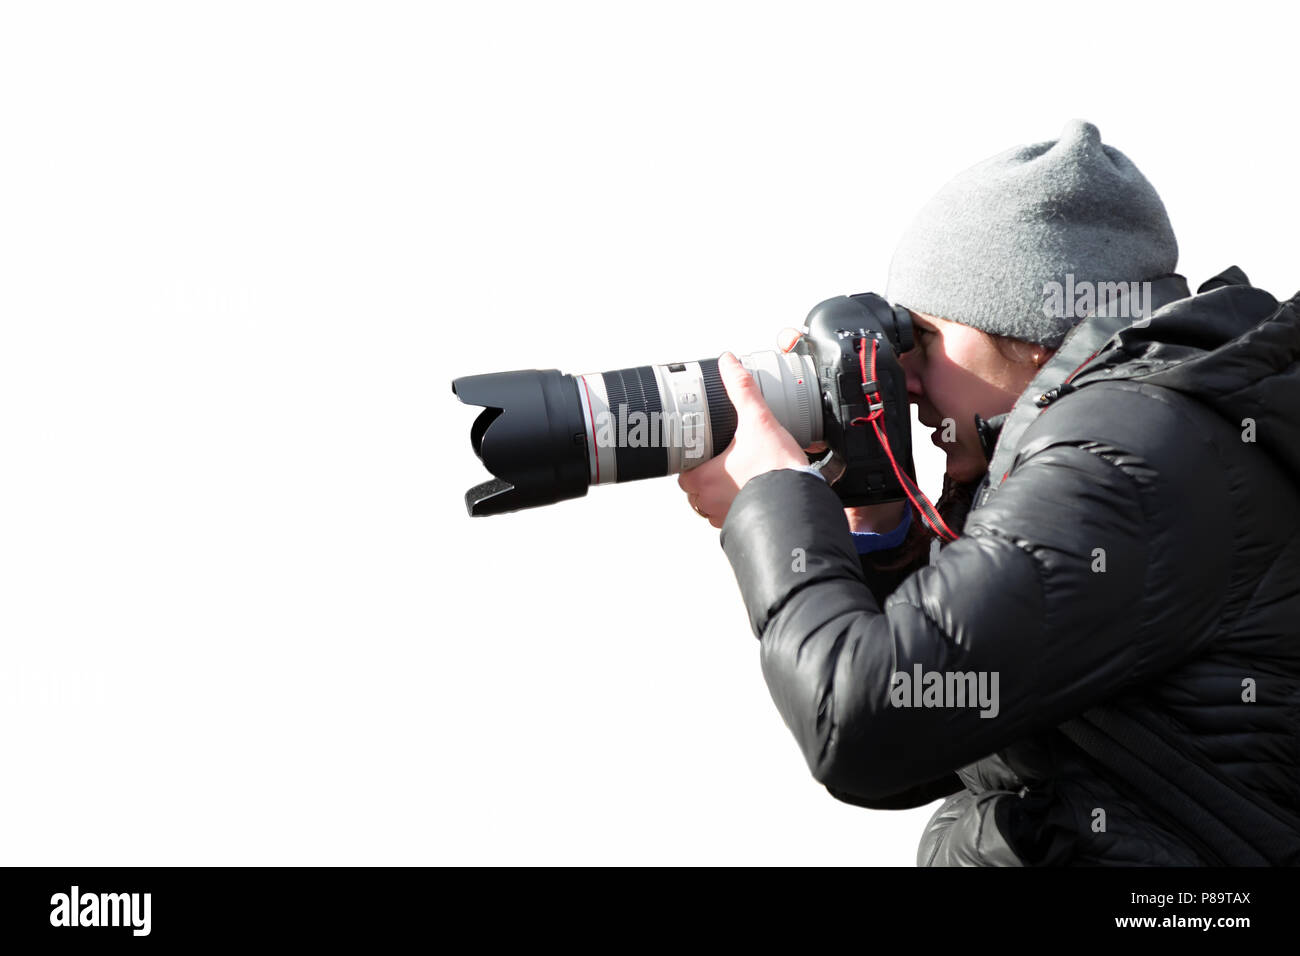 Photographer with professional camera and lens on white background Stock Photo